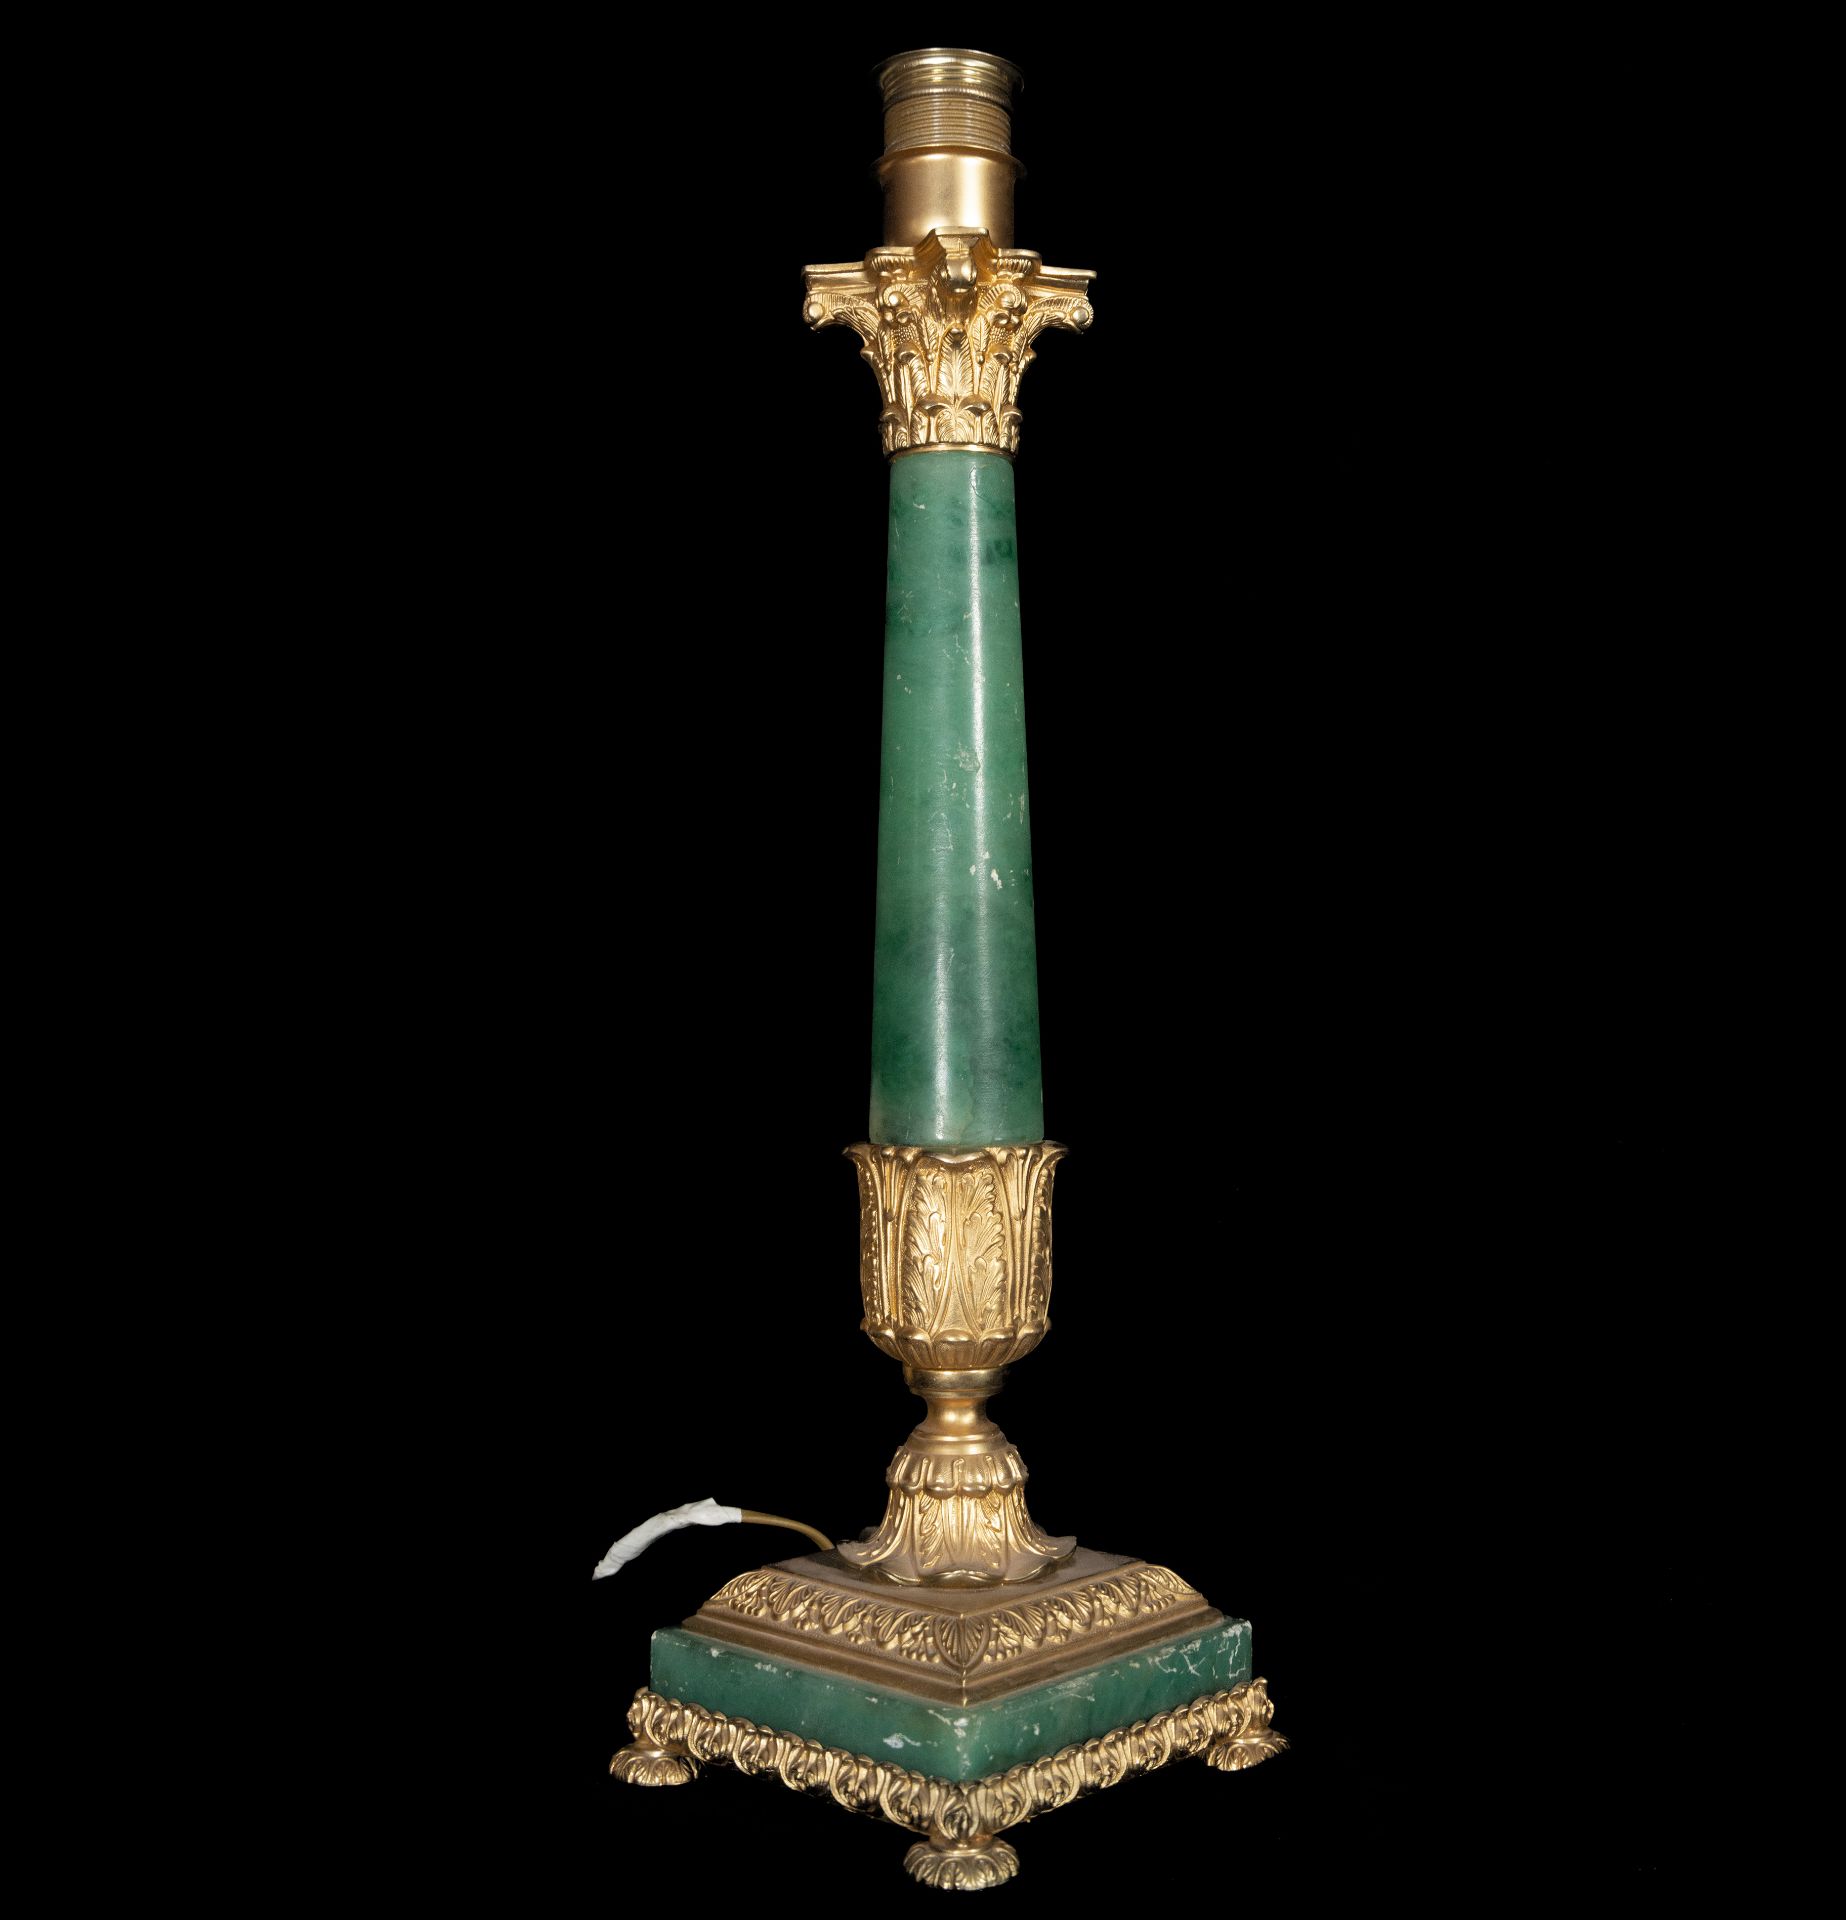 Pair of Empire Lamps in Onyx and mercury-gilded bronze, 19th century - Image 6 of 10